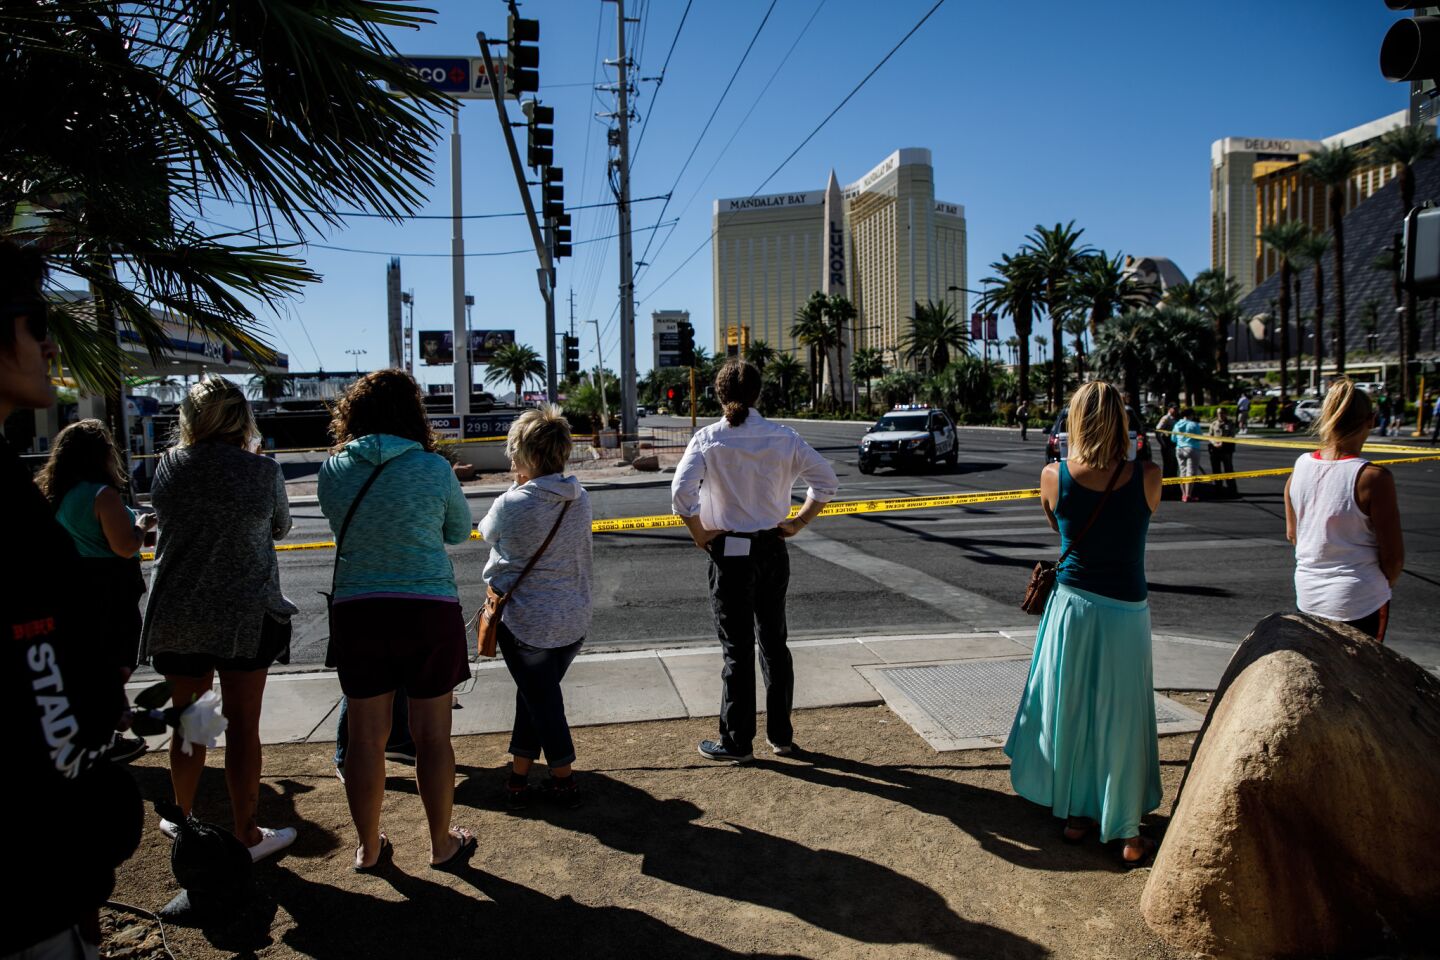 Tourists visit the crime scene, cordoned off by officials as the investigation of the mass shooting continues in Las Vegas.